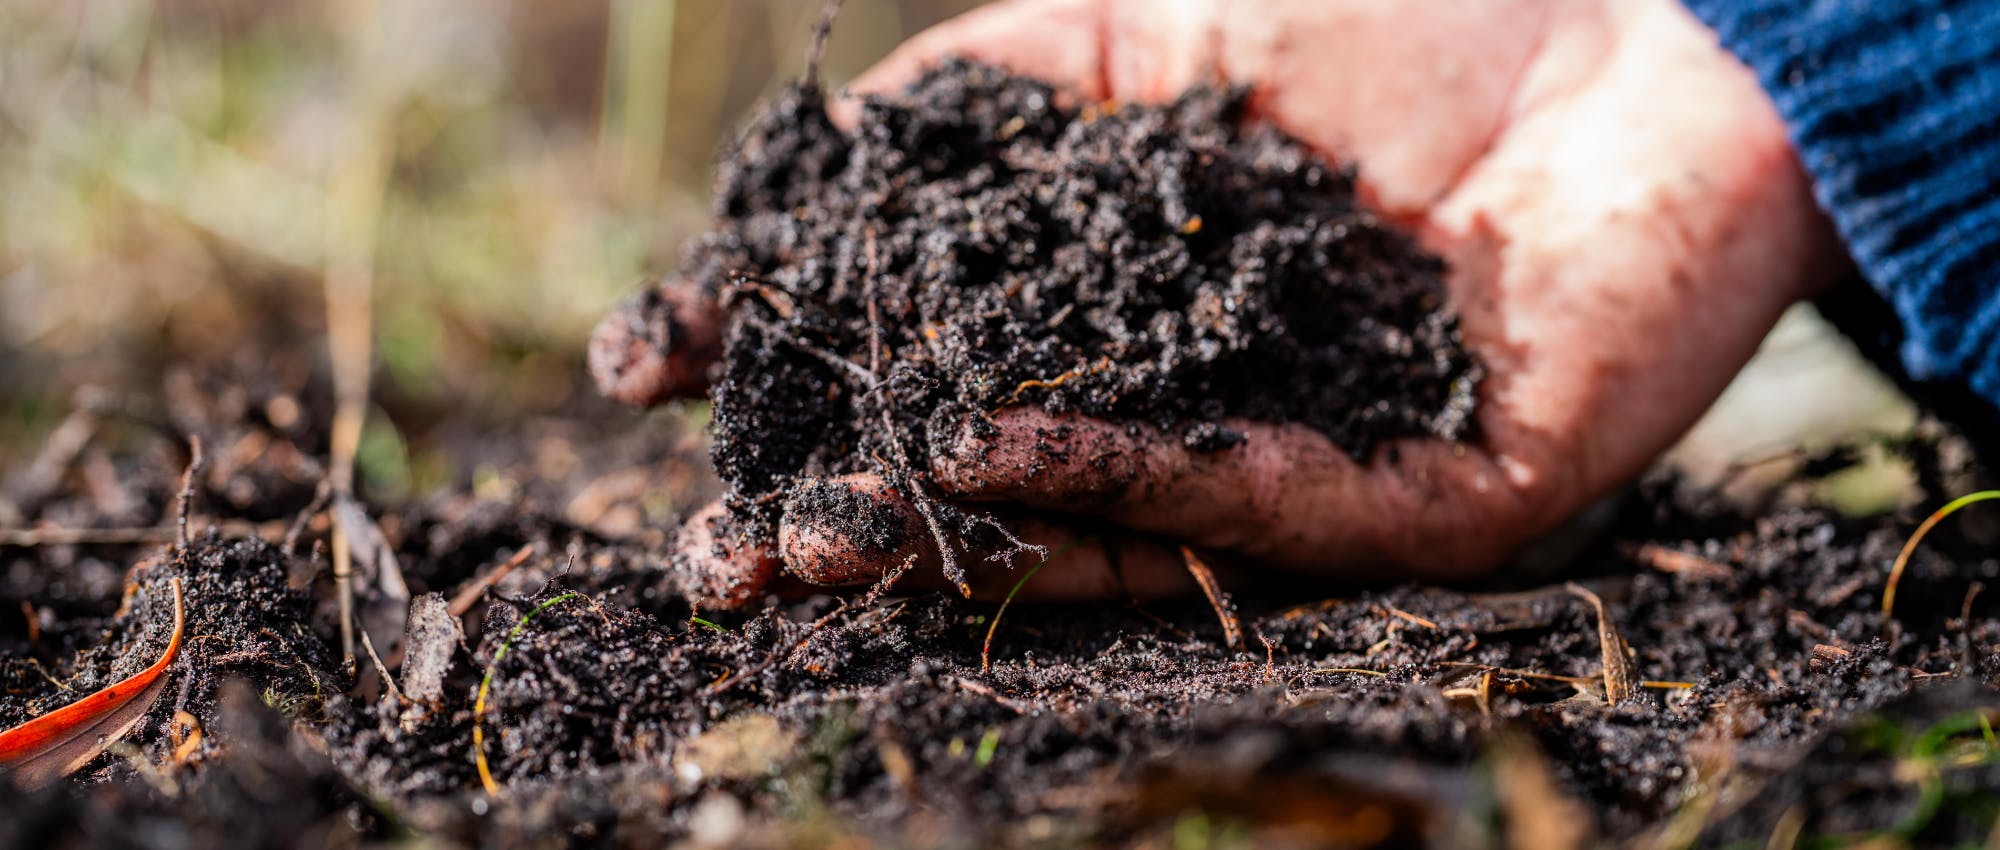 Soil fungi storing carbon through carbon sequestration on a farm, receiving carbon credits.